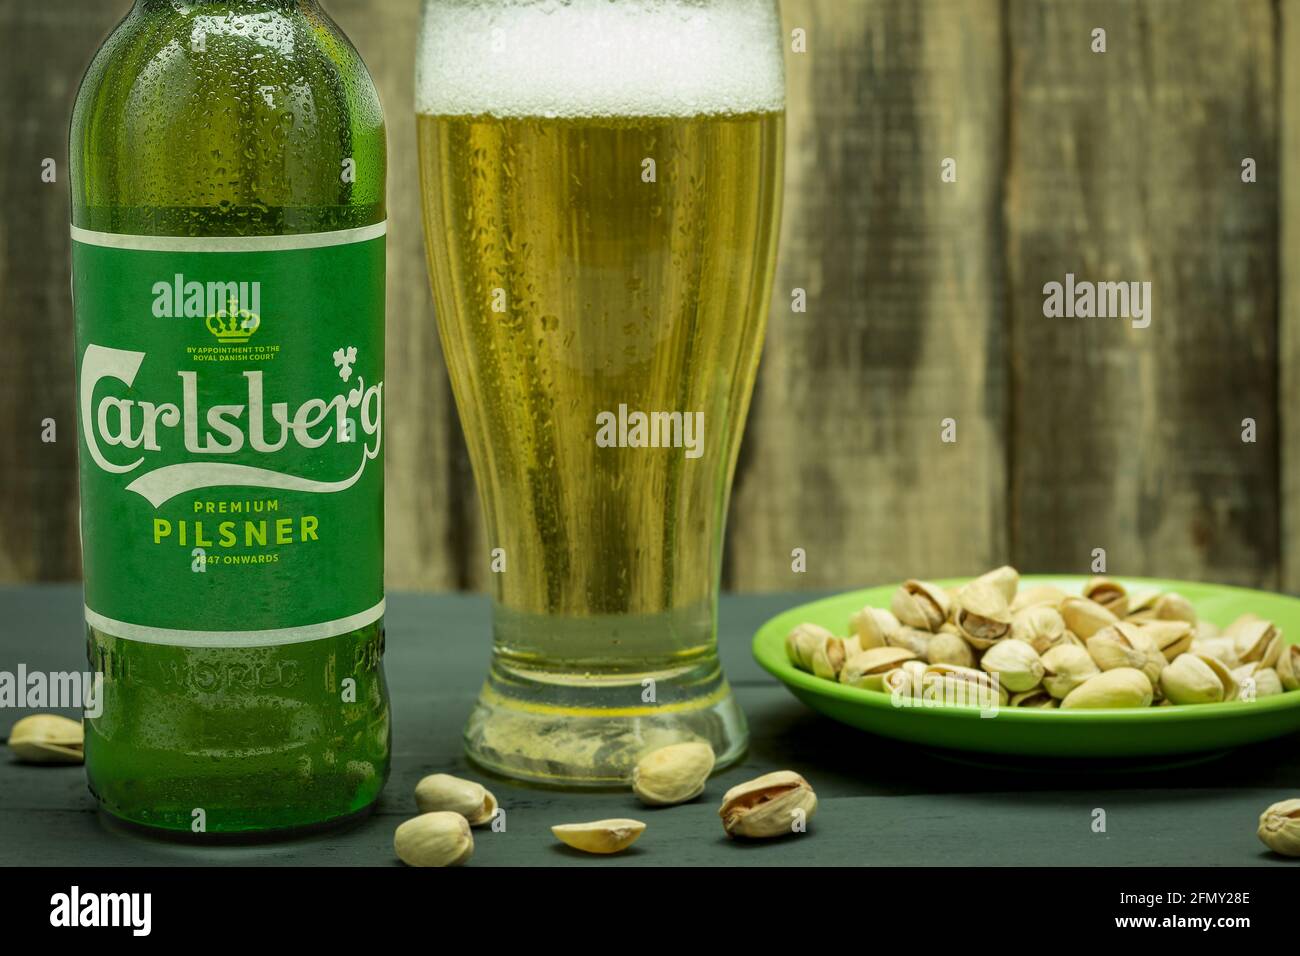 Warsaw, Poland - April 26, 2021: Cool Carlsberg beer in a glass bottle on a wooden background. Carlsberg beer bottle with water drops. Copy space for Stock Photo